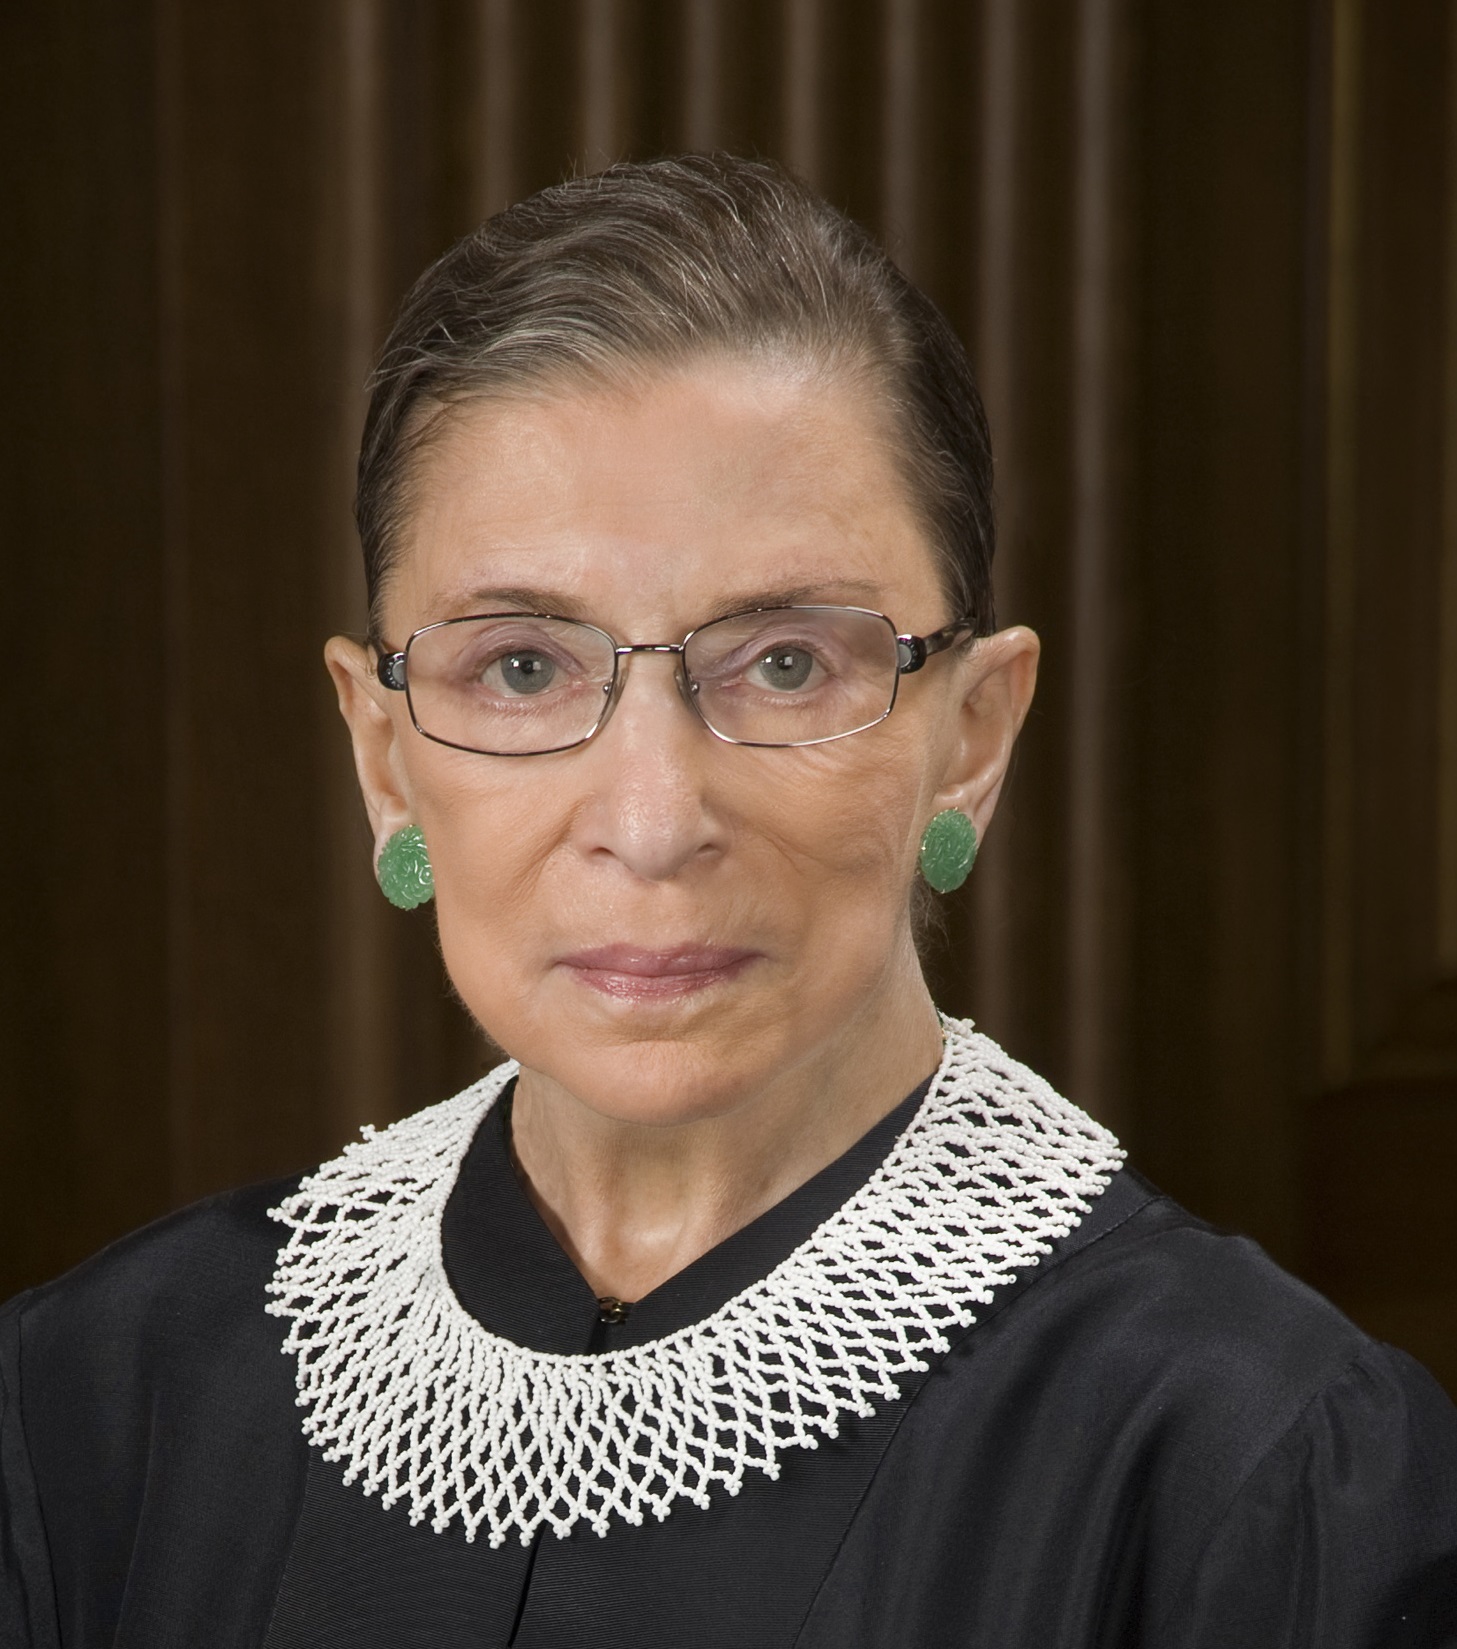 NASW mourns the death of U.S. Supreme Court Justice Ruth Bader Ginsburg